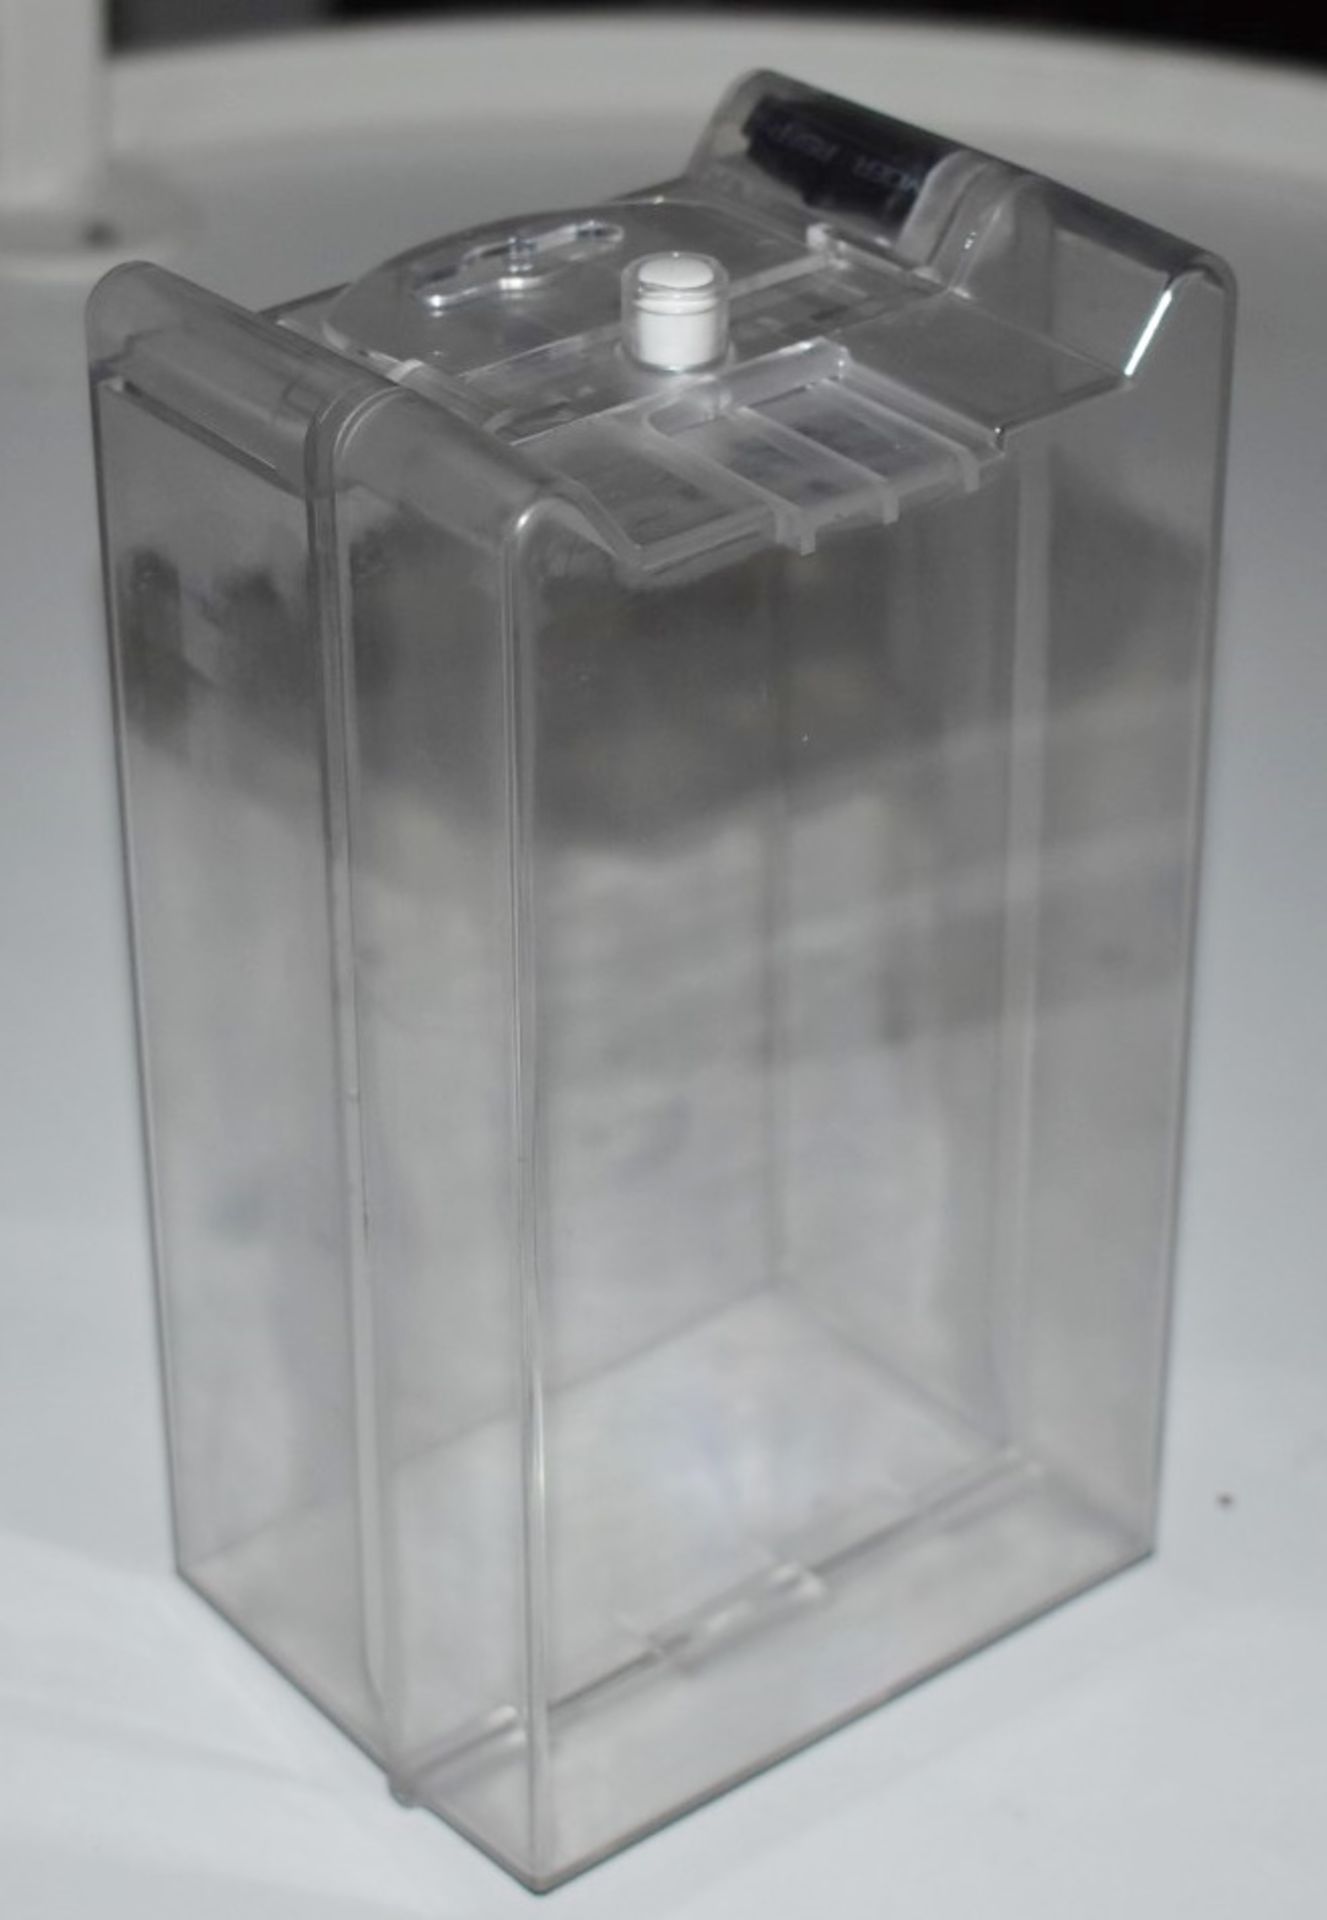 80 x Catalyst Clear Acrylic Retail Security Safer Cases With RF Tags and Hanging Tags - Brand New - Image 3 of 9